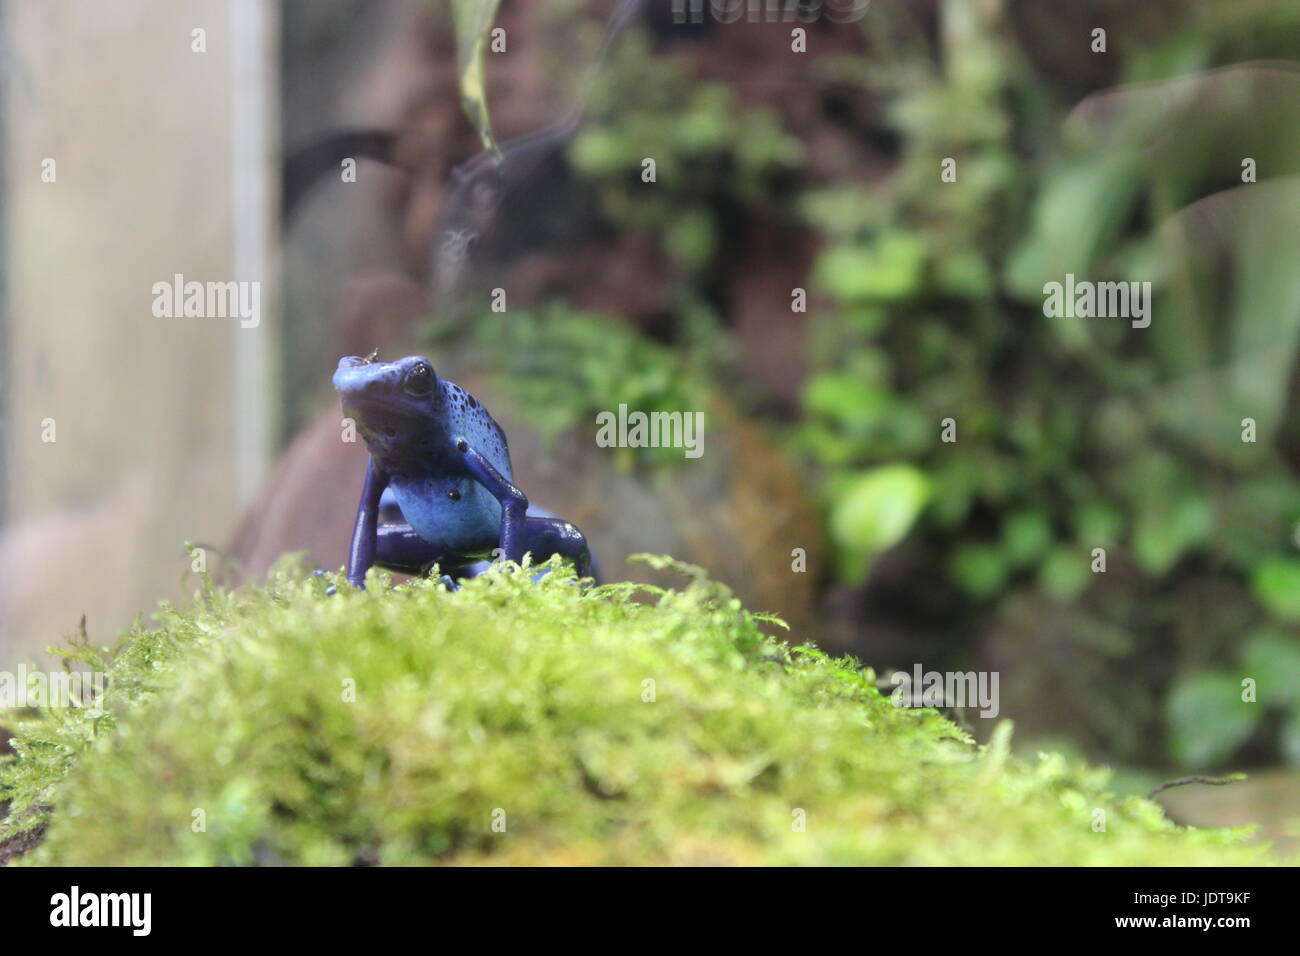 A close up of a beautiful bright blue frog on some moss. Stock Photo